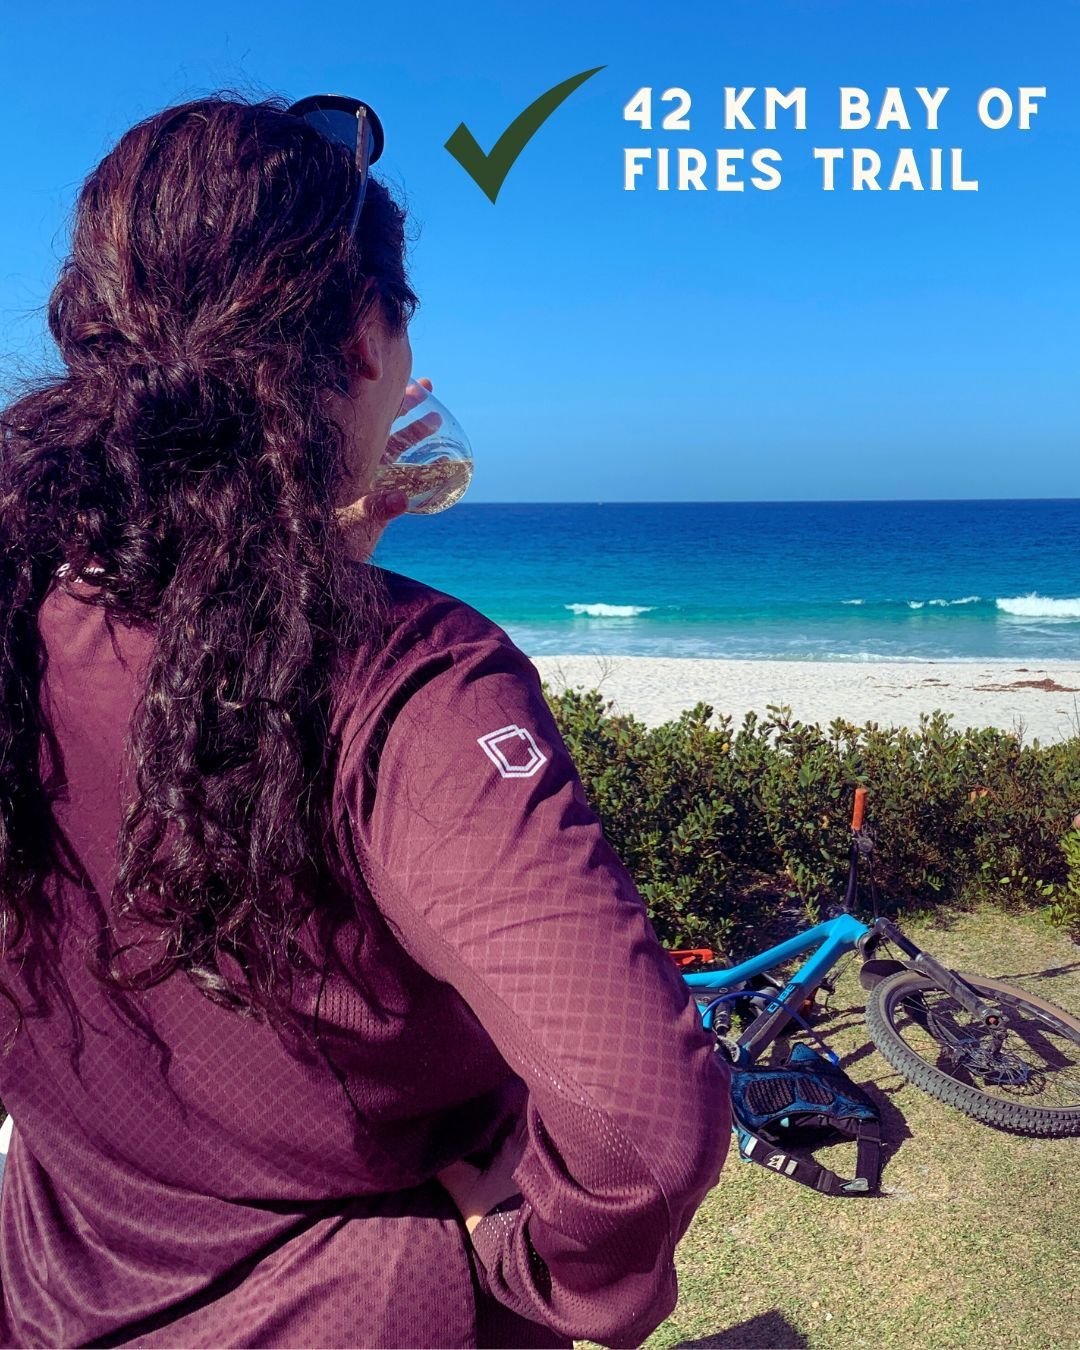 The epic Bay of Fires trail is something you have to experience to believe. It is  42kms of incredible single track from the top of a mountain all the way to the beach. It is a big rewarding day out on the saddle. There is only one way to finish&hell